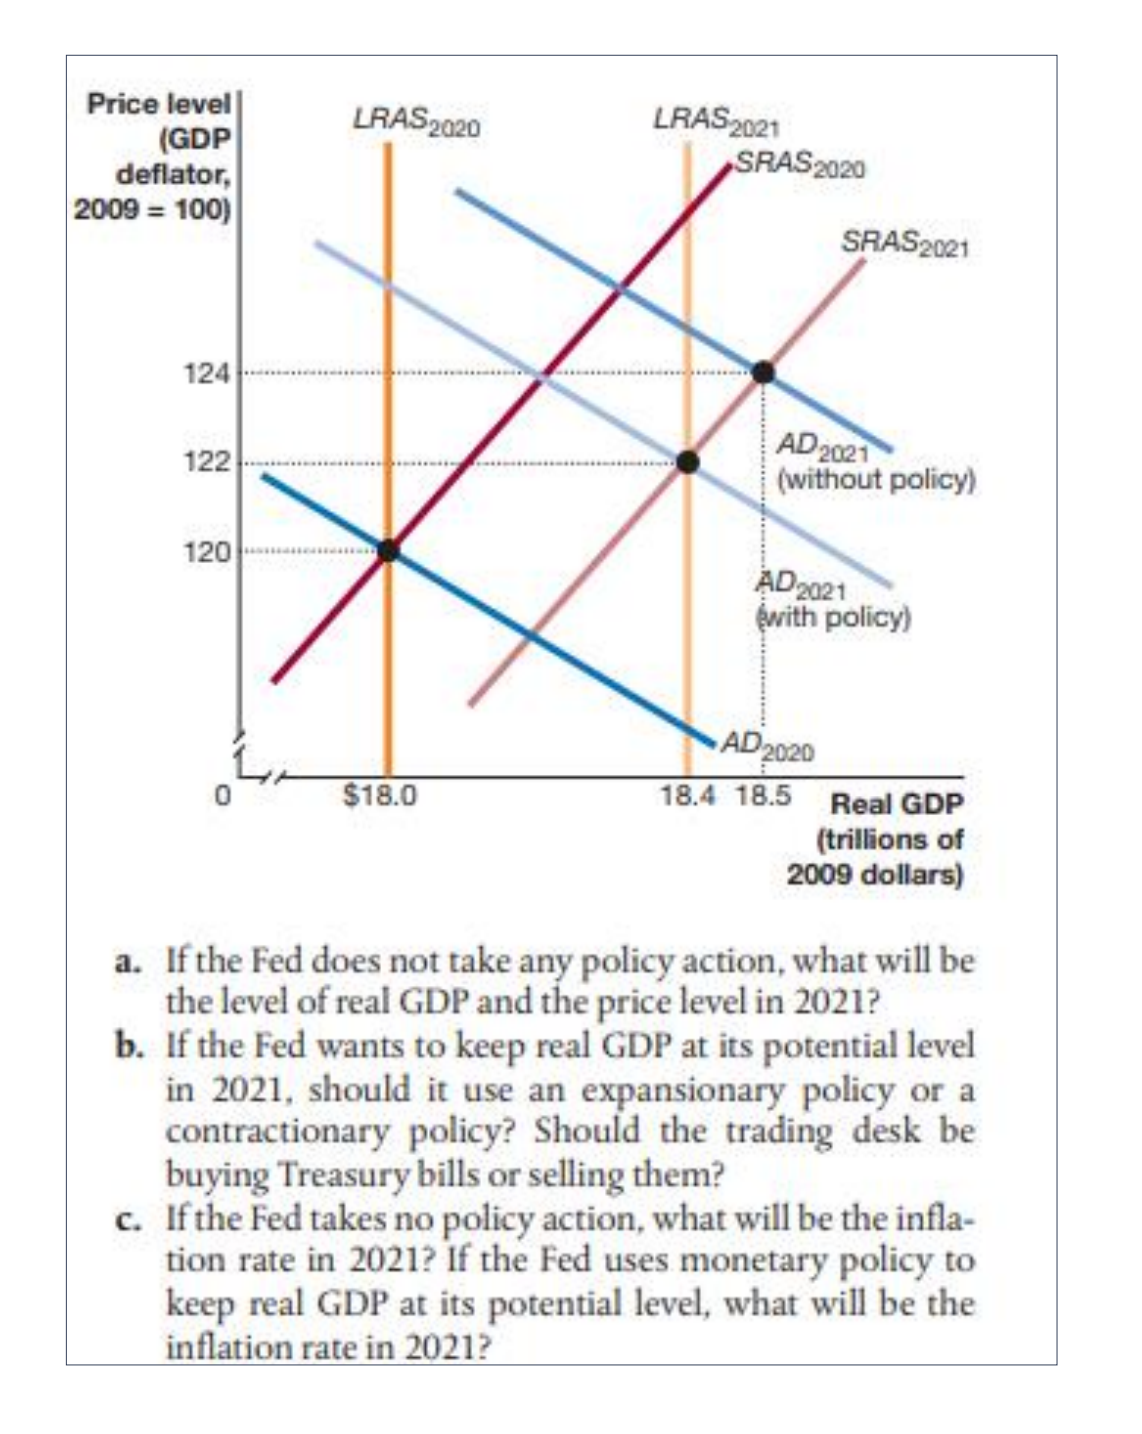 Price level
(GDP
deflator,
2009 = 100)
124
122
120
LRAS 2020
$18.0
LRAS 2021
SRAS2020
SRAS2021
AD 2021
(without policy)
AD2021
(with policy)
AD 2020
18.4 18.5 Real GDP
(trillions of
2009 dollars)
a. If the Fed does not take any policy action, what will be
the level of real GDP and the price level in 2021?
b. If the Fed wants to keep real GDP at its potential level
in 2021, should it use an expansionary policy or a
contractionary policy? Should the trading desk be
buying Treasury bills or selling them?
c. If the Fed takes no policy action, what will be the infla-
tion rate in 2021? If the Fed uses monetary policy to
keep real GDP at its potential level, what will be the
inflation rate in 2021?